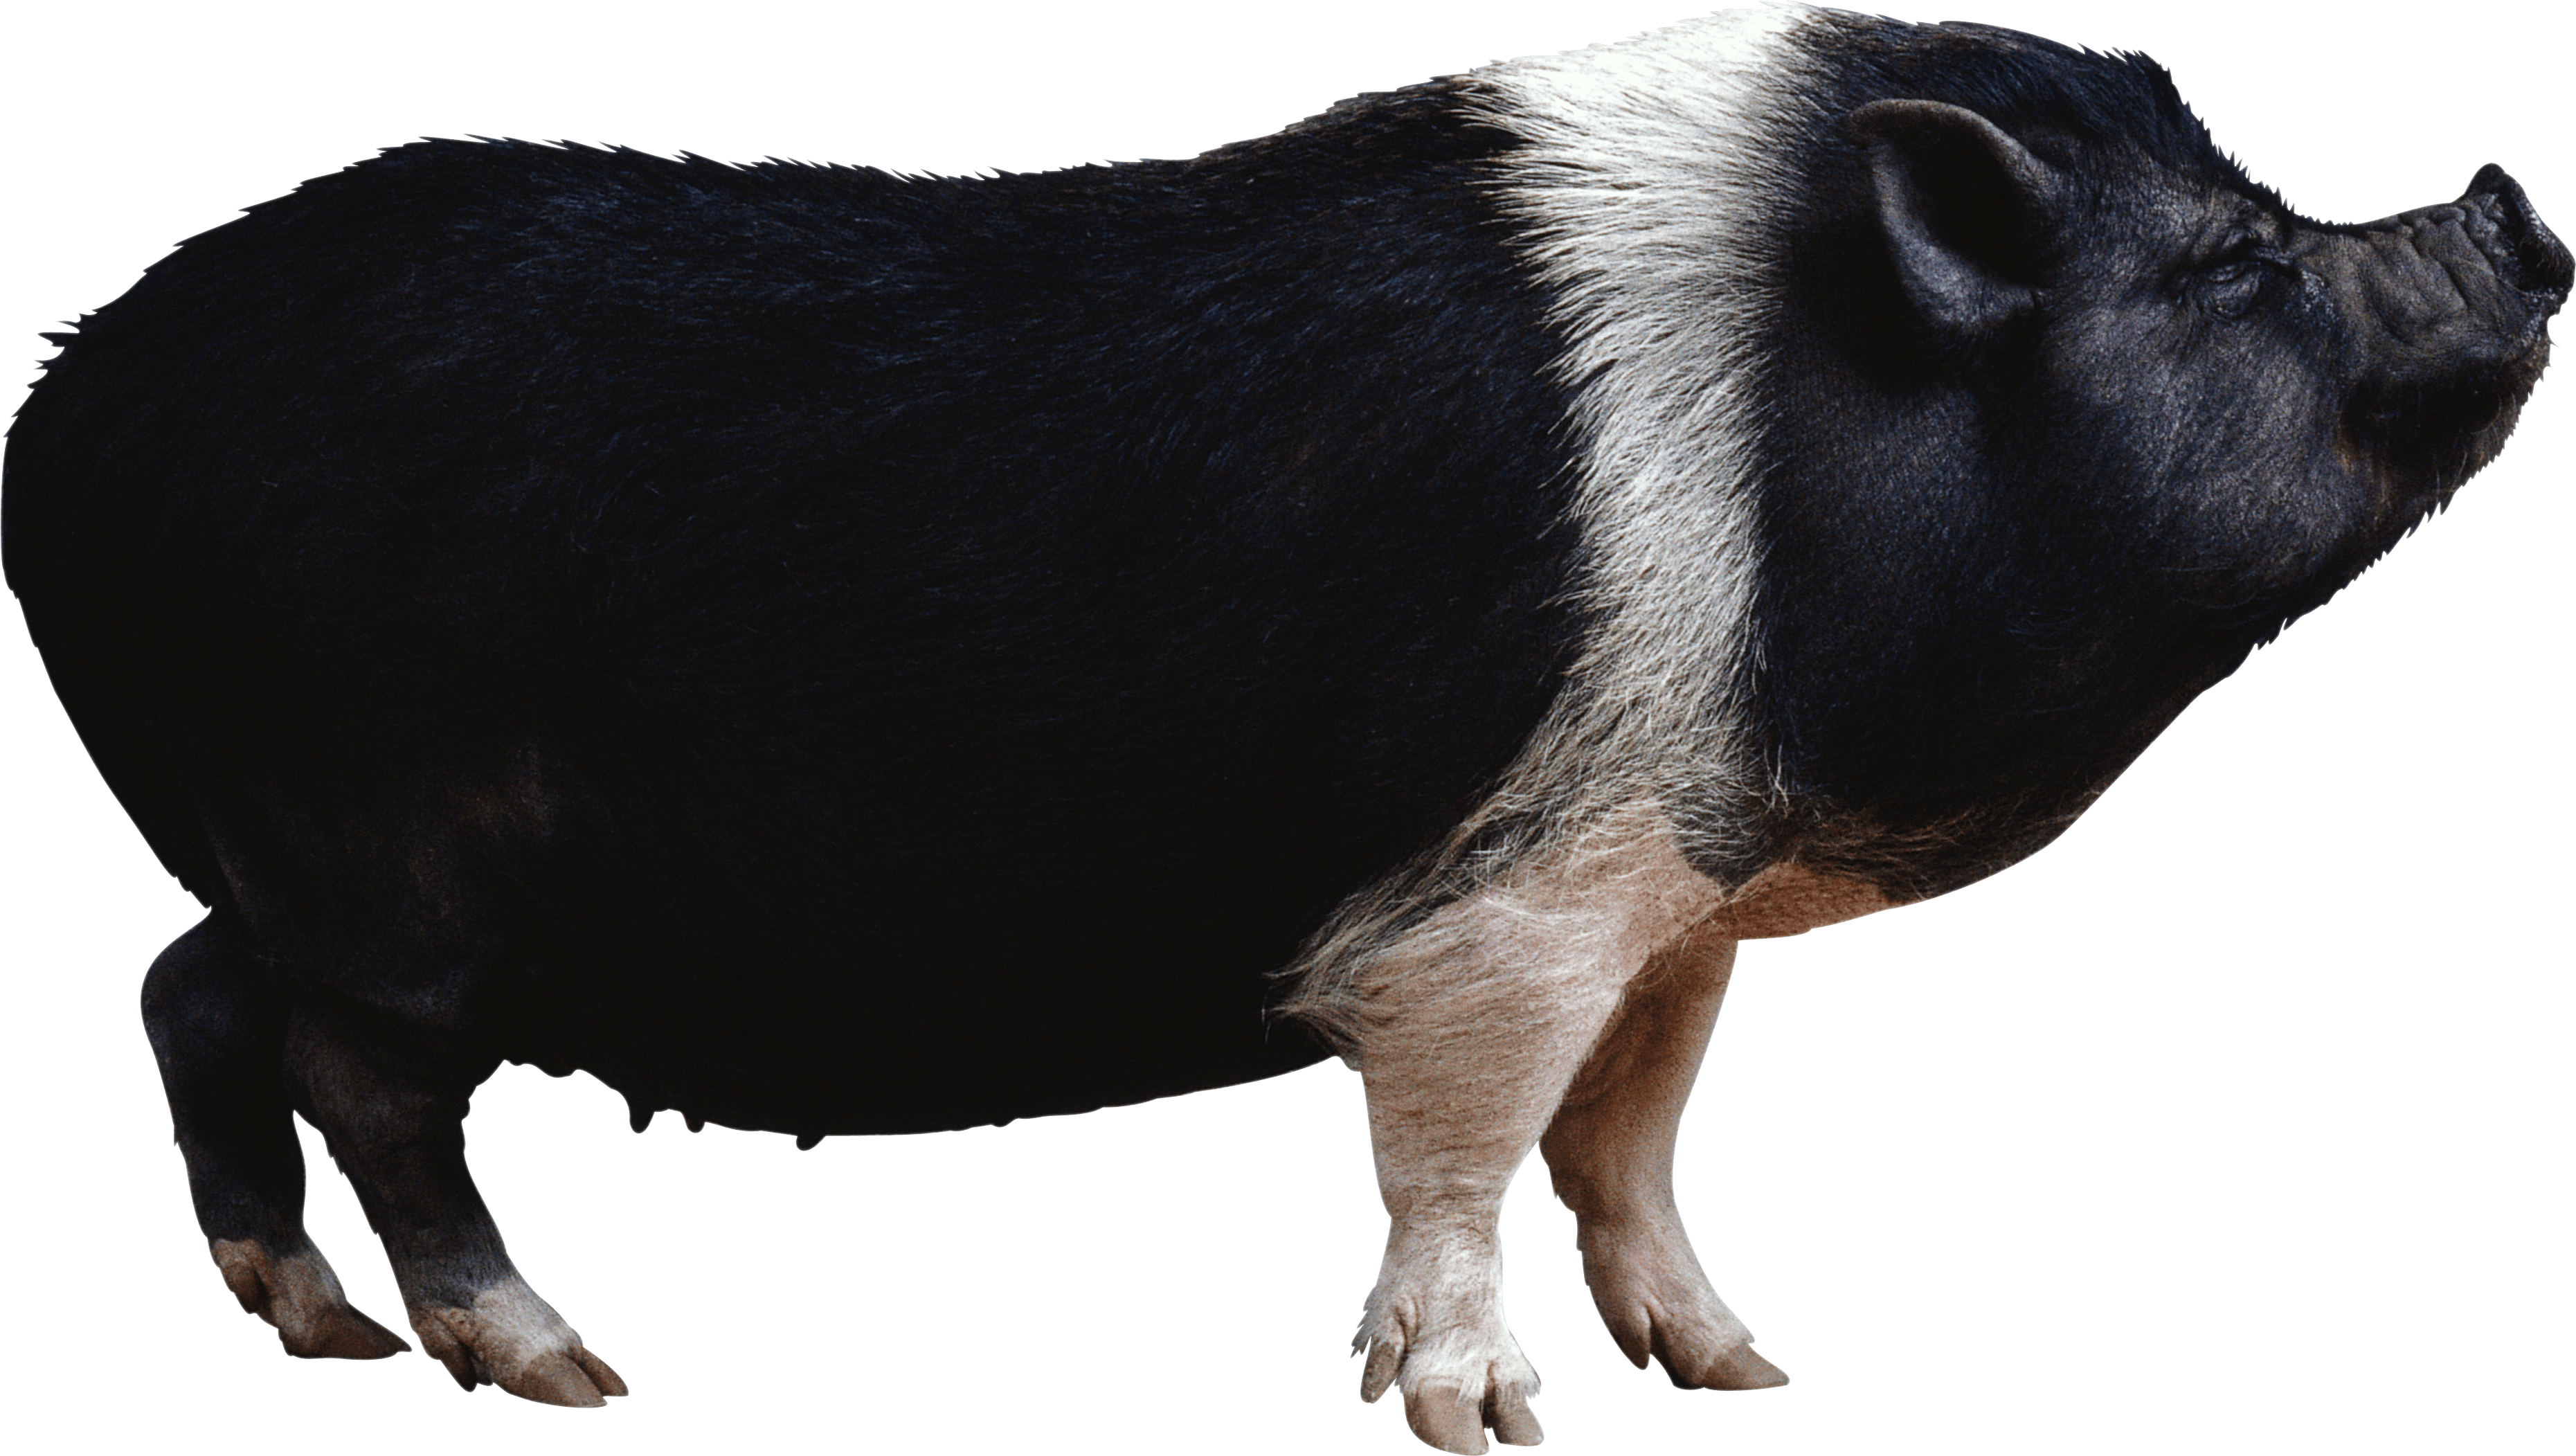 Black pig from side PNG Image - PurePNG | Free transparent CC0 PNG ...